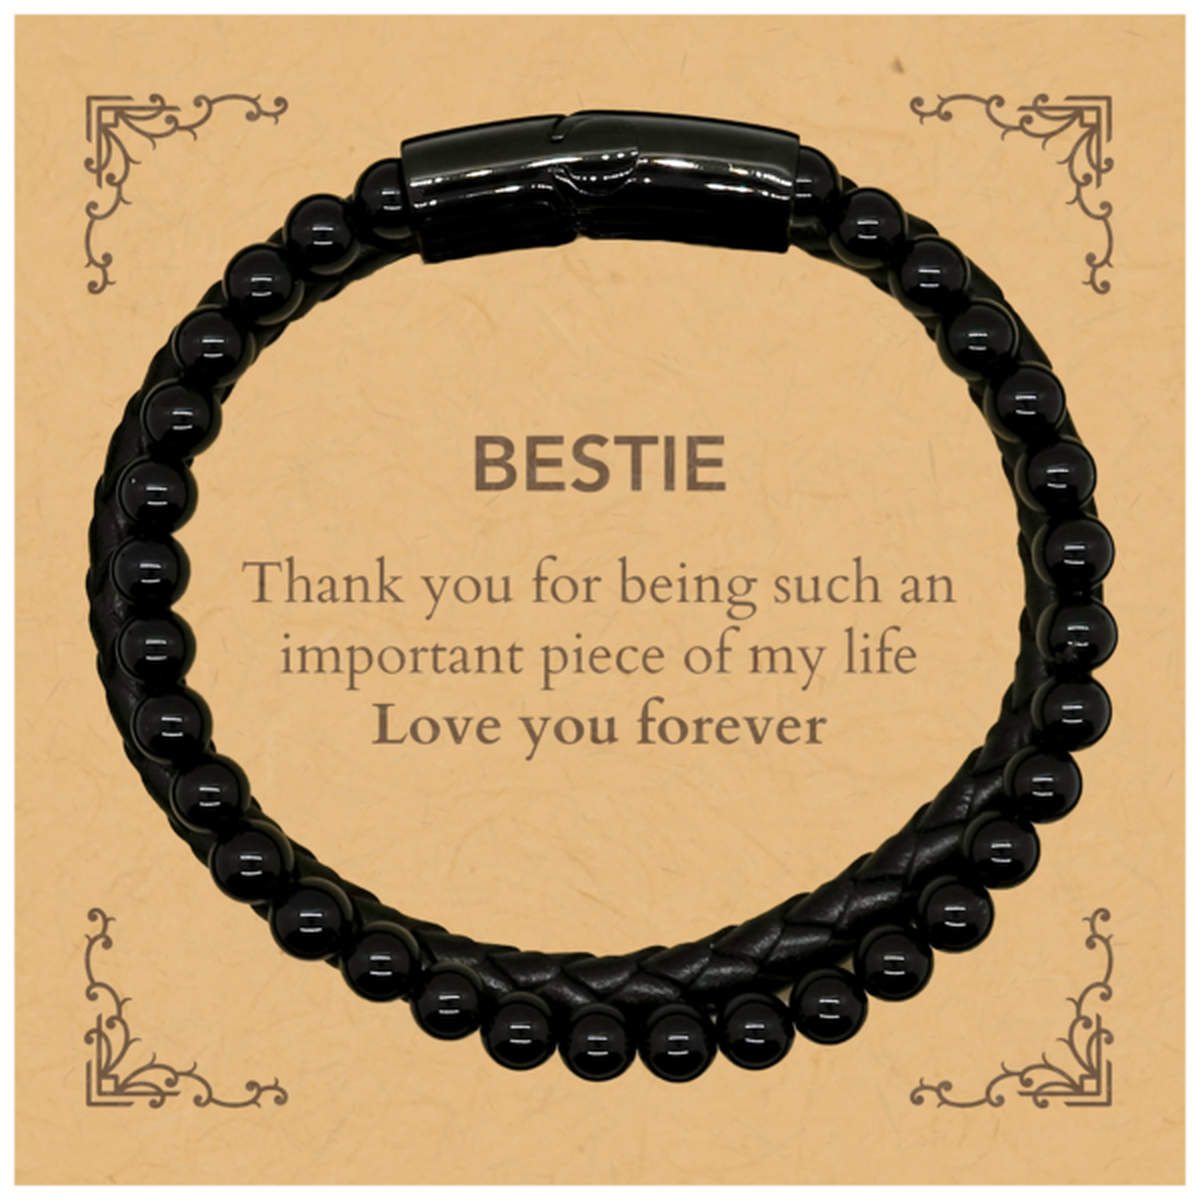 Appropriate Bestie Stone Leather Bracelets Epic Birthday Gifts for Bestie Thank you for being such an important piece of my life Bestie Christmas Mothers Fathers Day